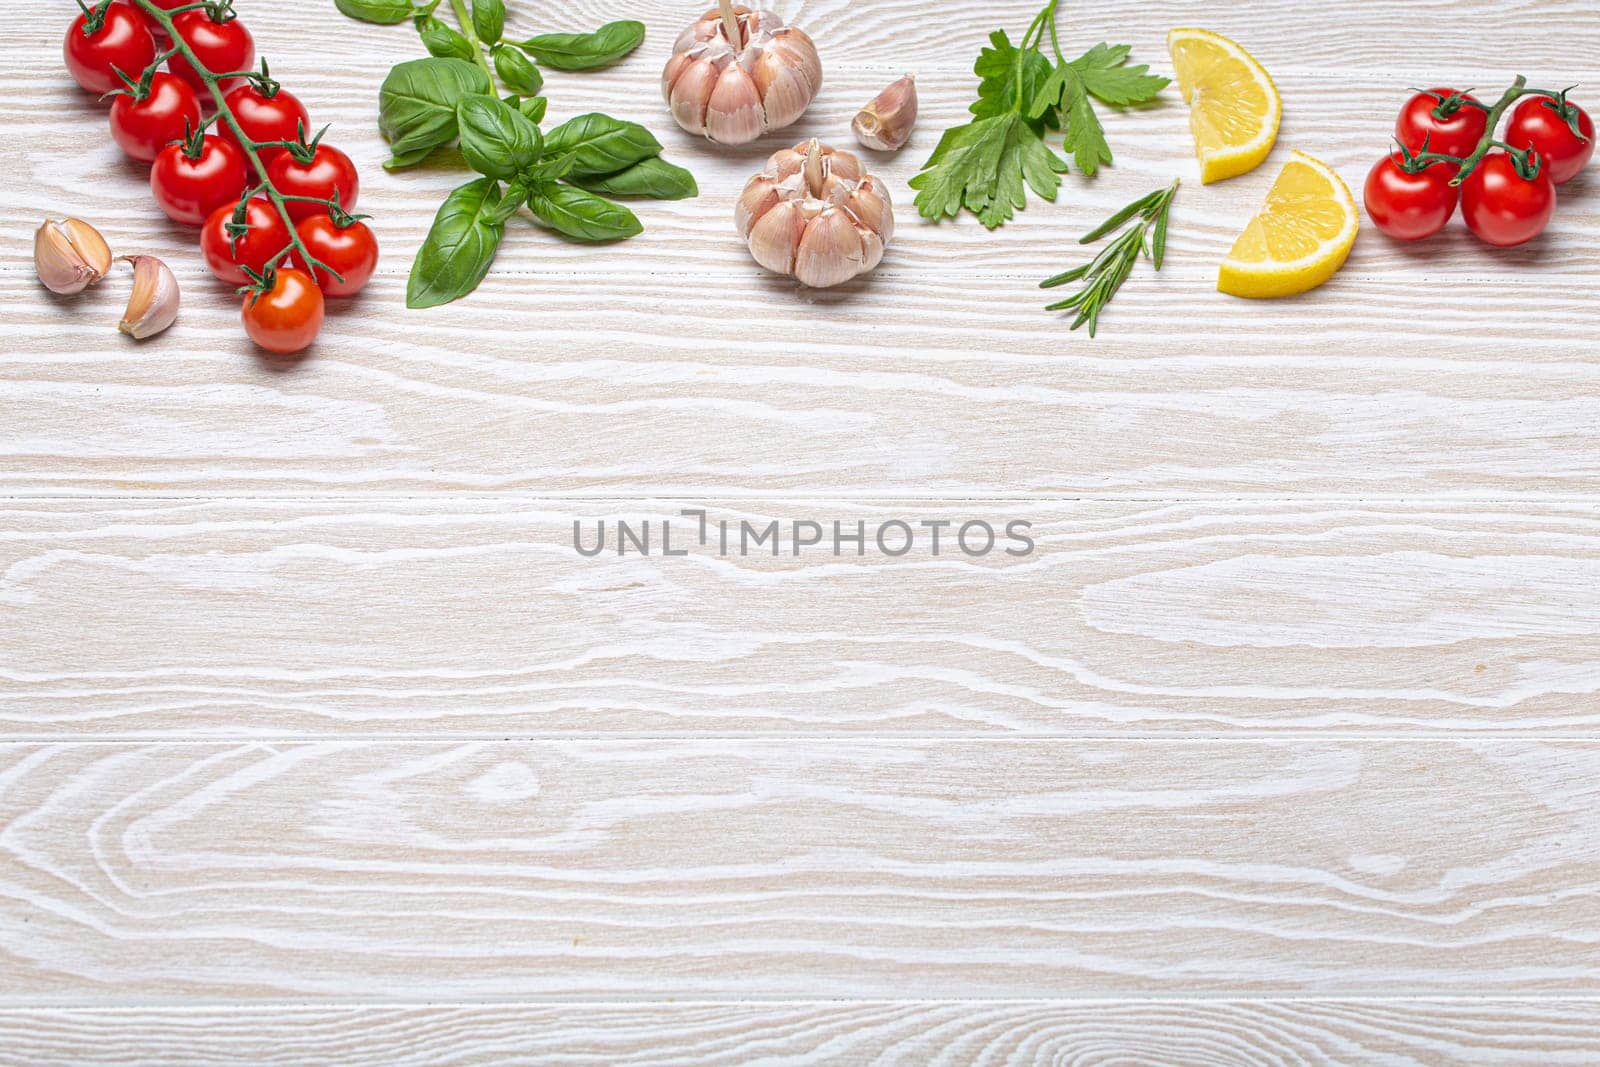 Healthy food ingredients composition with fresh cherry tomatoes, herbs, garlic cloves, lemon wedges on white wooden rustic background, overhead shot with copy space